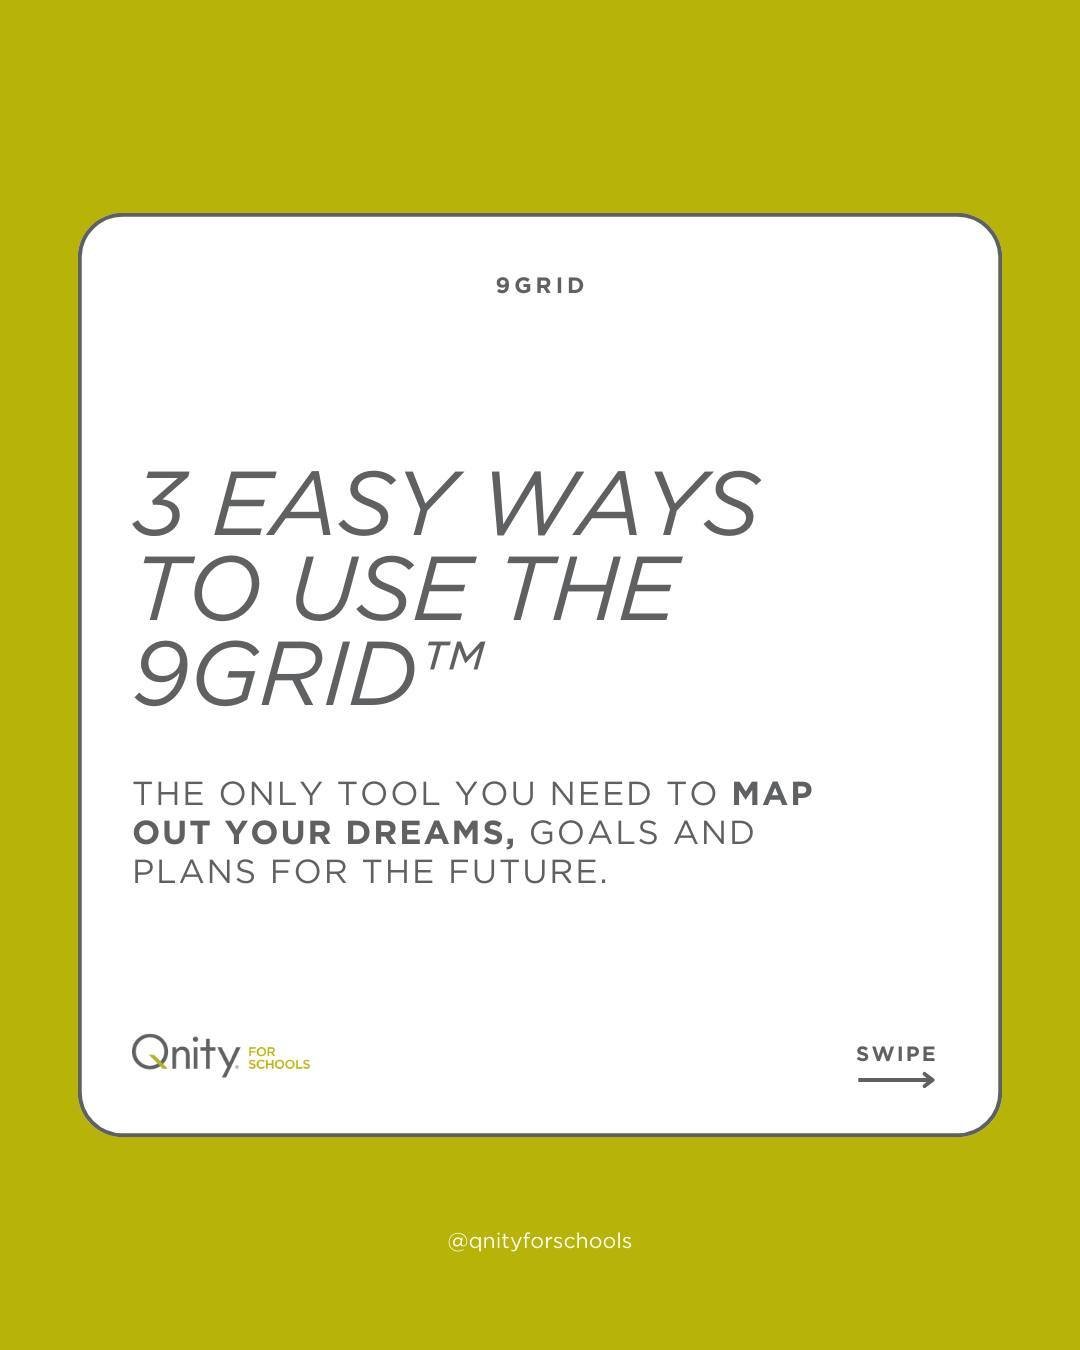 One tool, many uses. 

Our 9Grid&trade; doesn&rsquo;t offer a narrow approach to mind-mapping, dream-building and challenge-tackling. Instead, it allows you to find a method that makes sense to you &mdash; providing a fun, creative, and unique way to